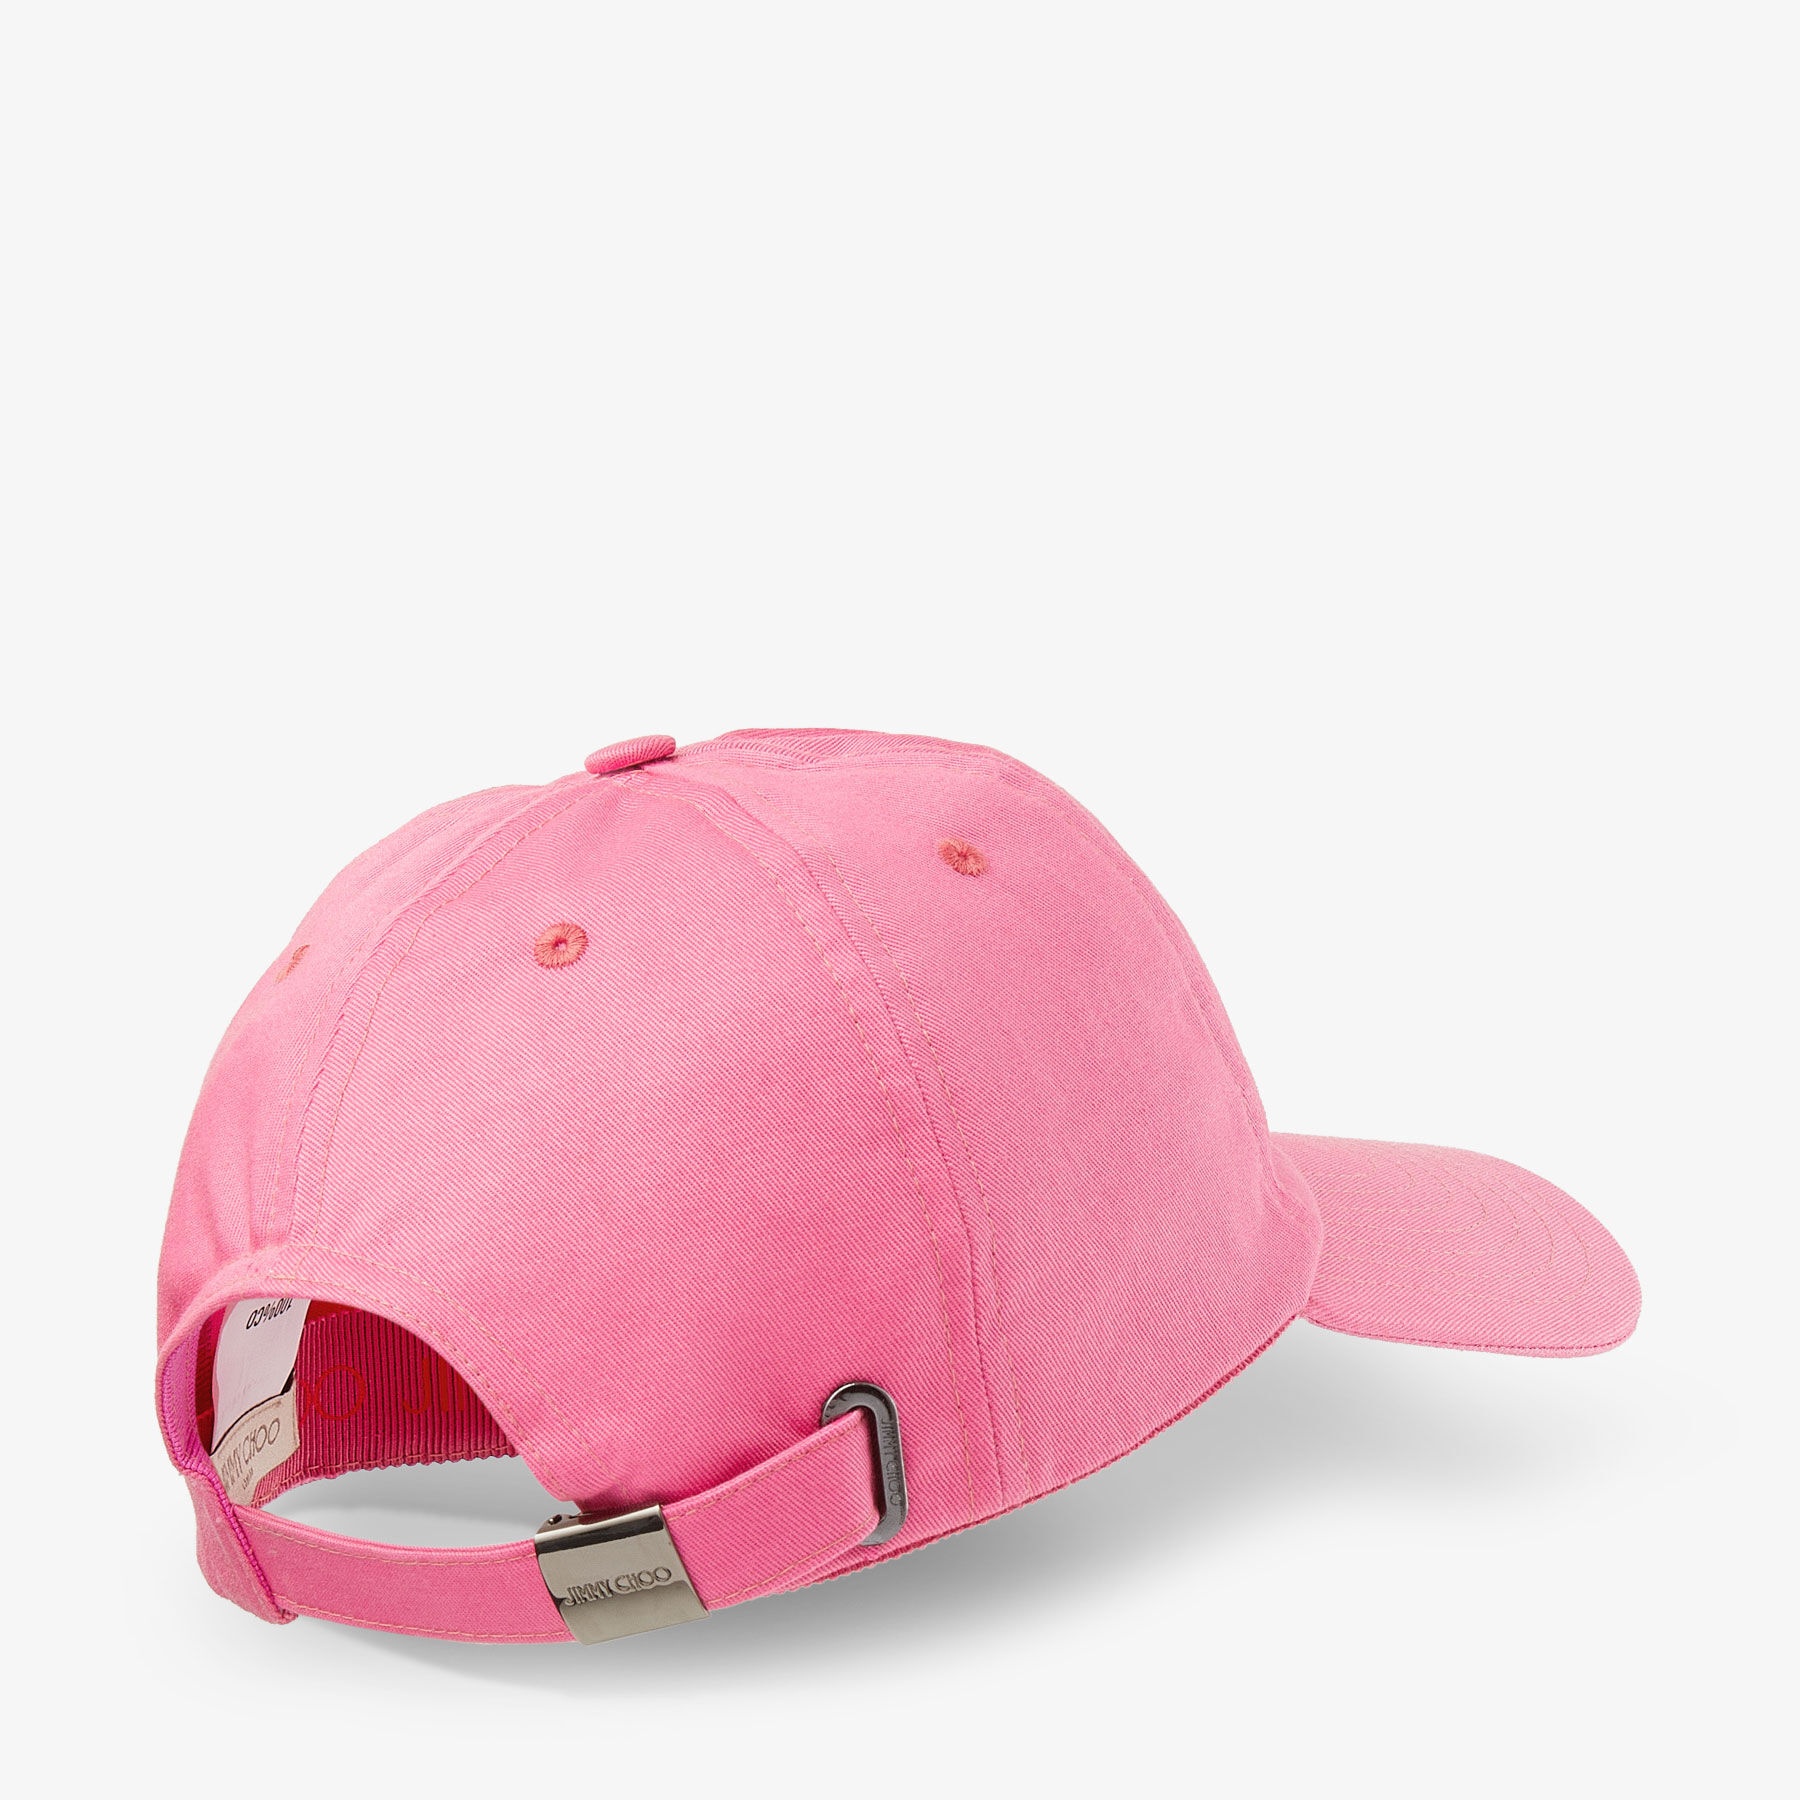 Pacifico
Paprika/Candy Pink Embroidered Cotton Baseball Cap - 4